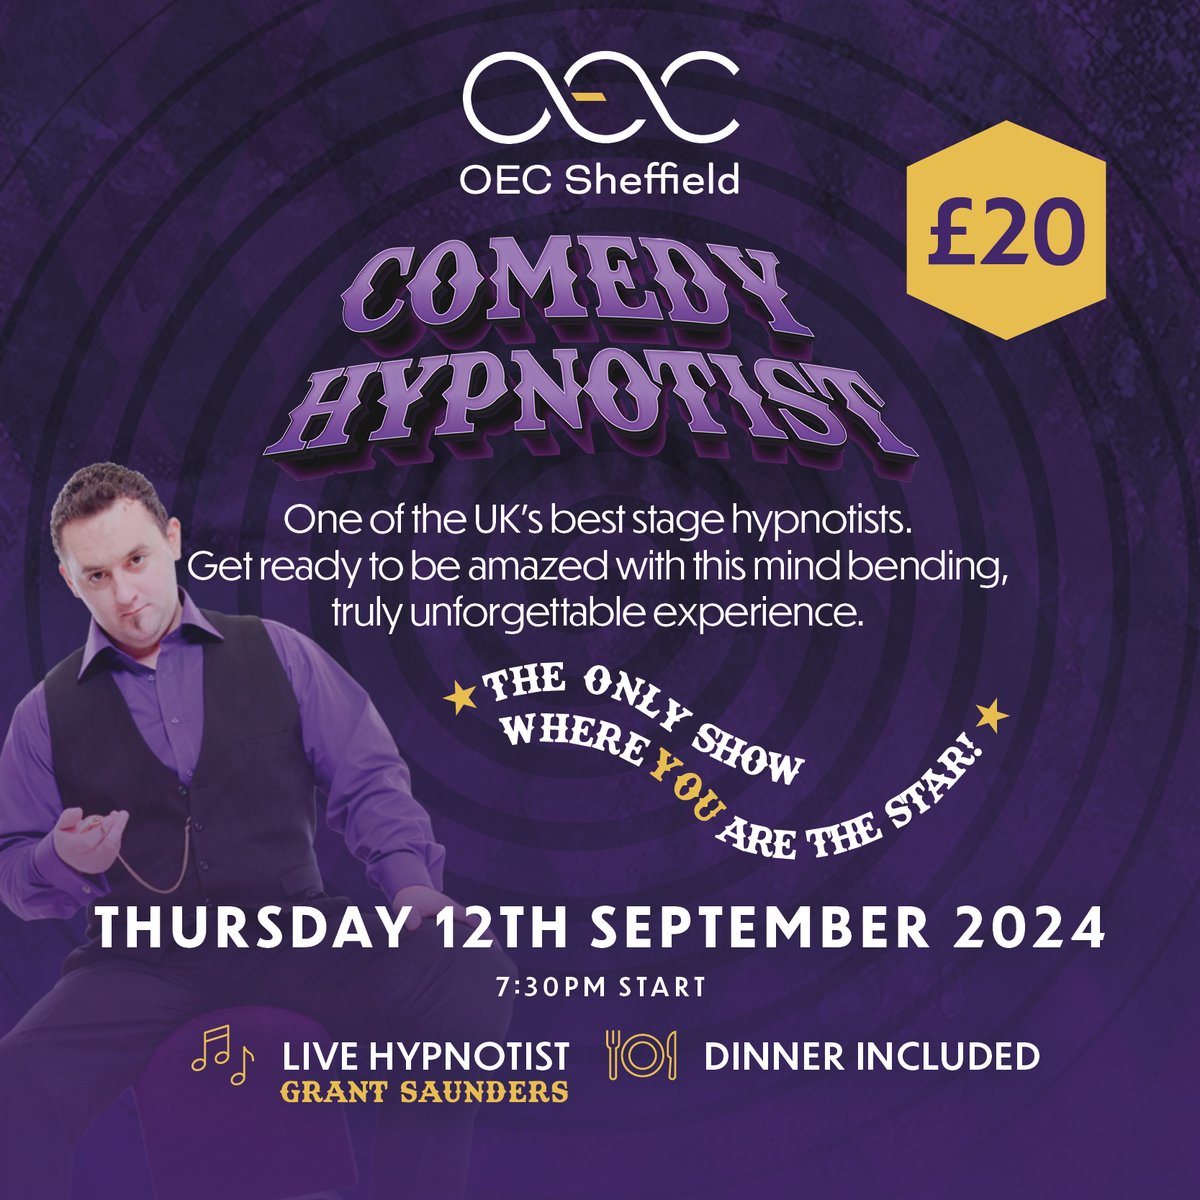 Join us for a night of side-splitting laughter with #comedy hypnotist Grant Saunders! 🎭 Don’t miss out on this one-of-a-kind event – grab your tickets now! 🎟️ tinyurl.com/54xxfsjz #sheffield #sheffieldevents #comedyhypnotist